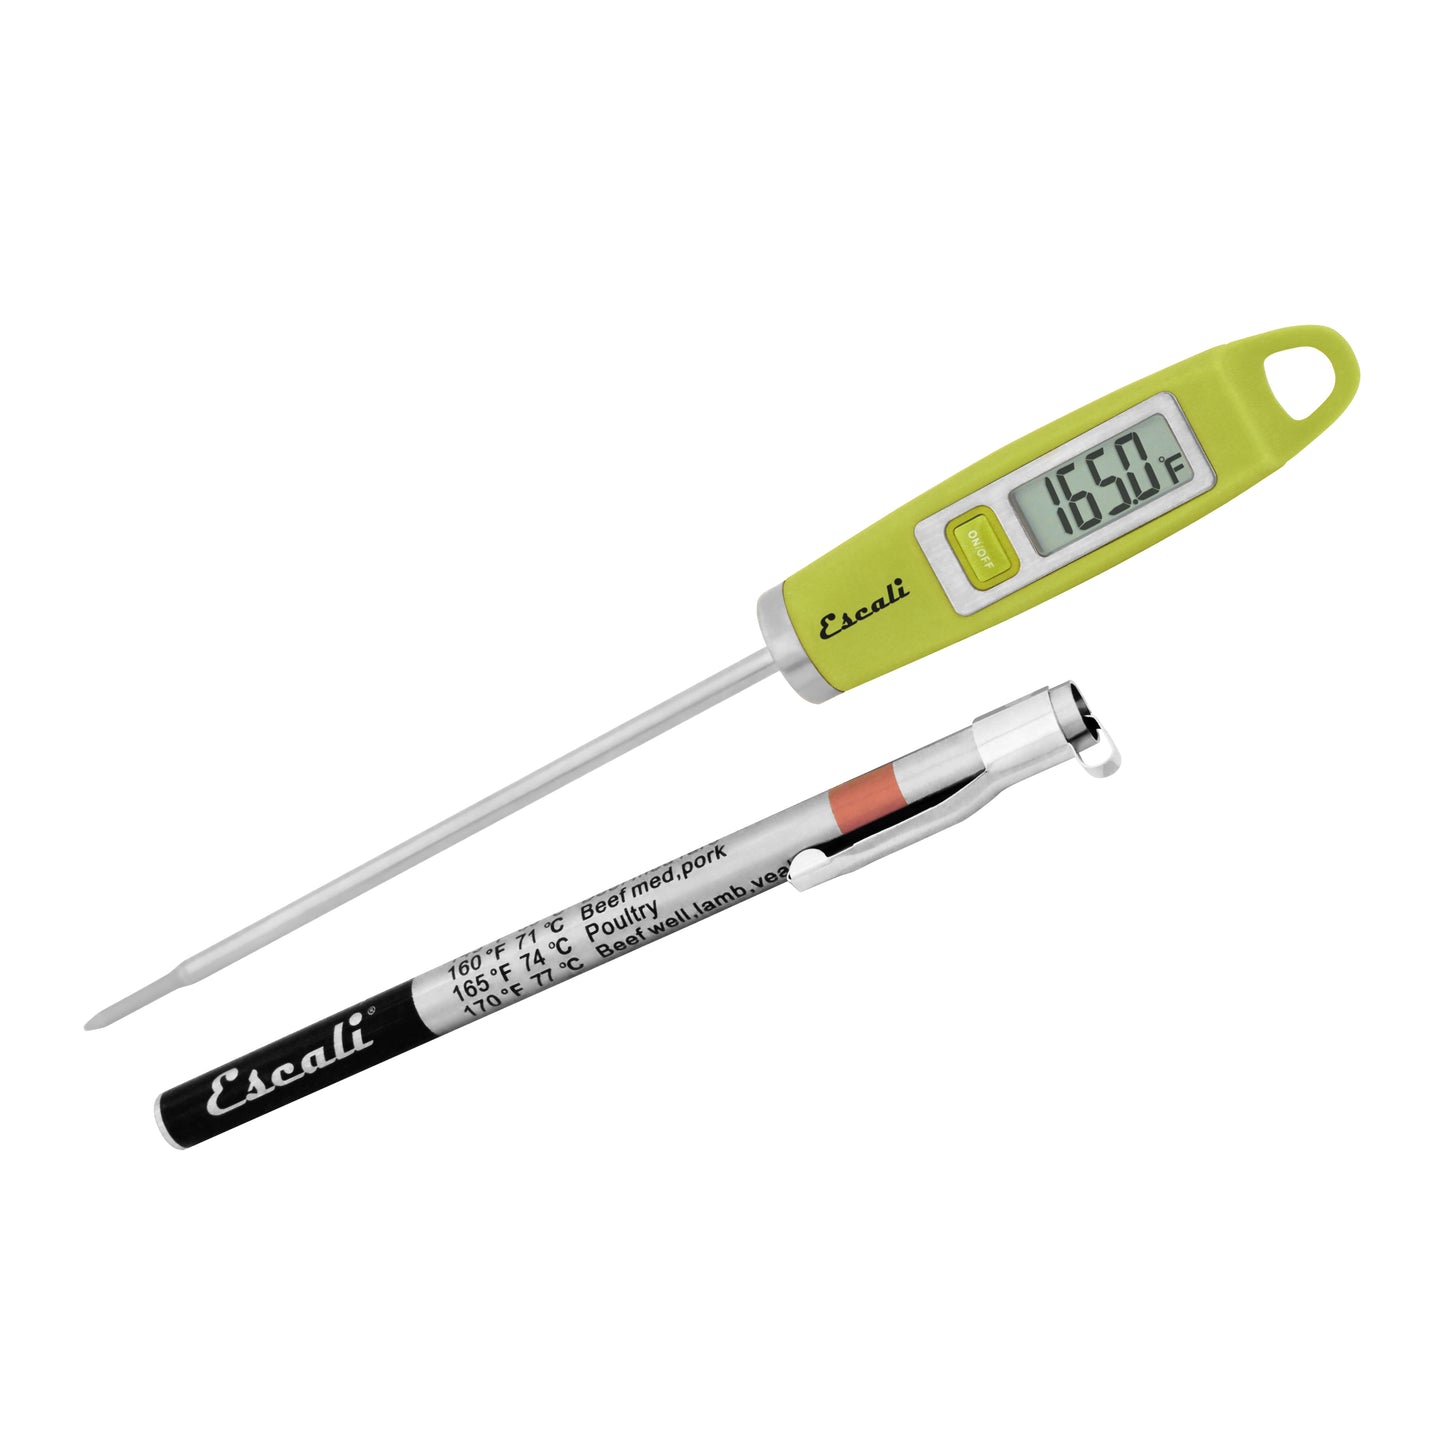 A photo of a green DH1 Gourmet Digital Thermometer on a white background